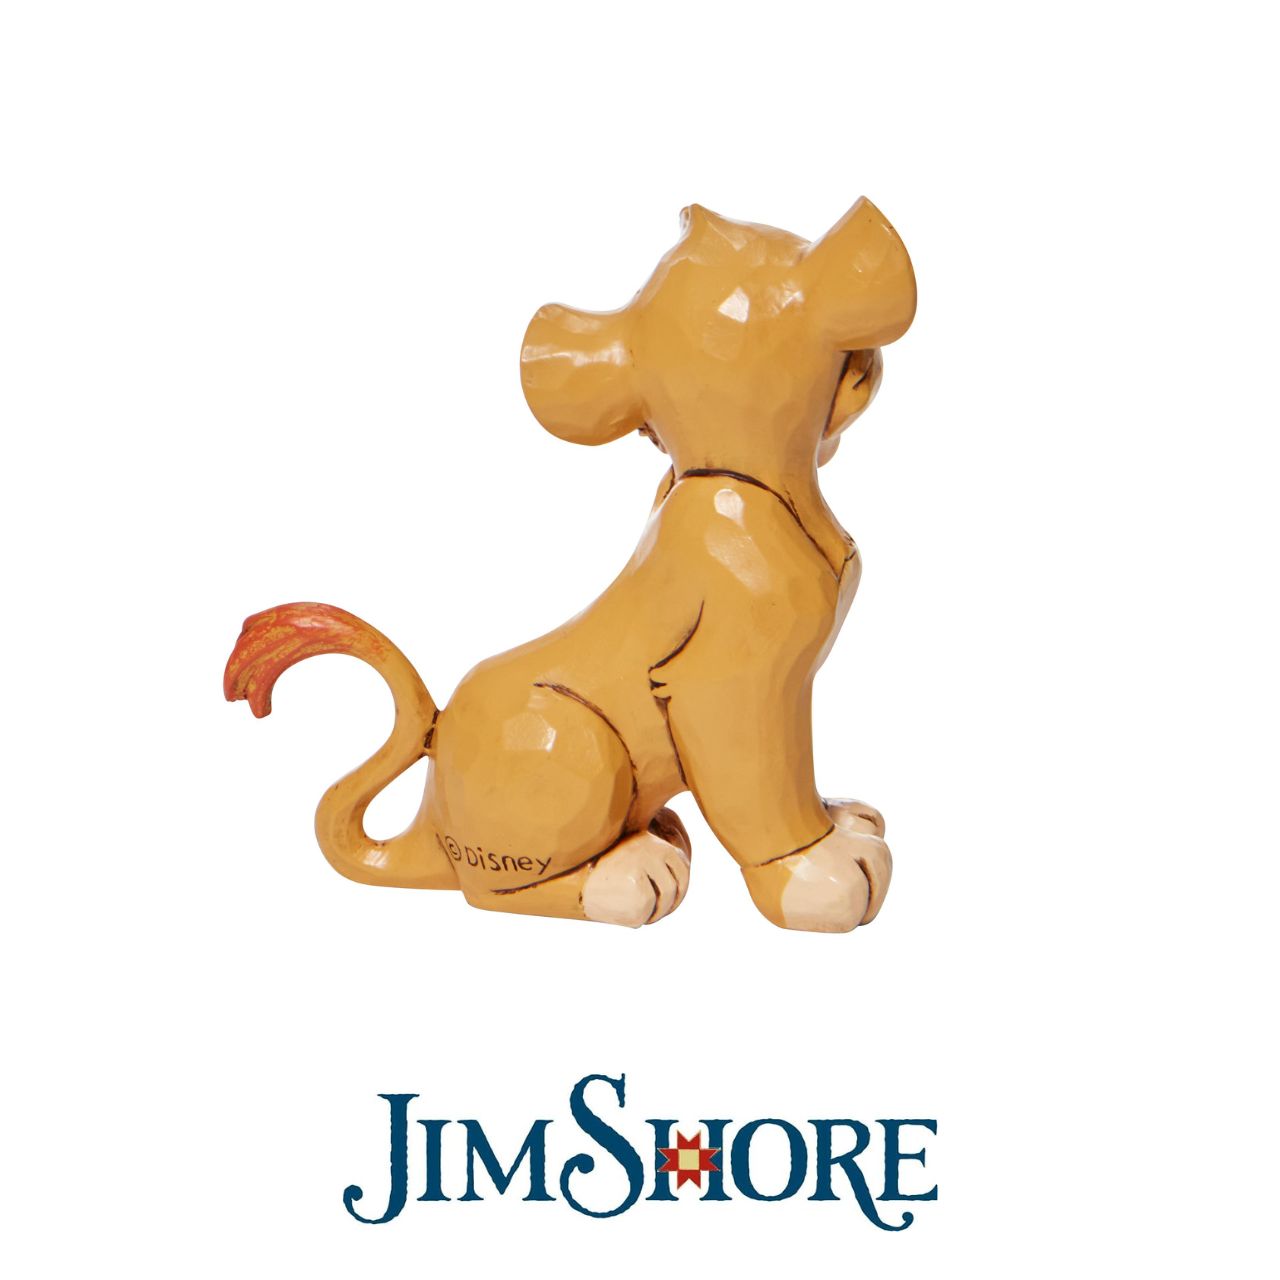 Jim Shore Disney Simba Mini Figurine  Simba, the cub to be king, boasts an adorable expression in this Jim Shore statuette. With folksy patterns down his side, he's a vision of playfulness and charm. Looking more like a house cat than a lion, he's the perfect addition to your home. Hand painted and hand sculpted high quality cast stone. Packaged in a branded giftbox.